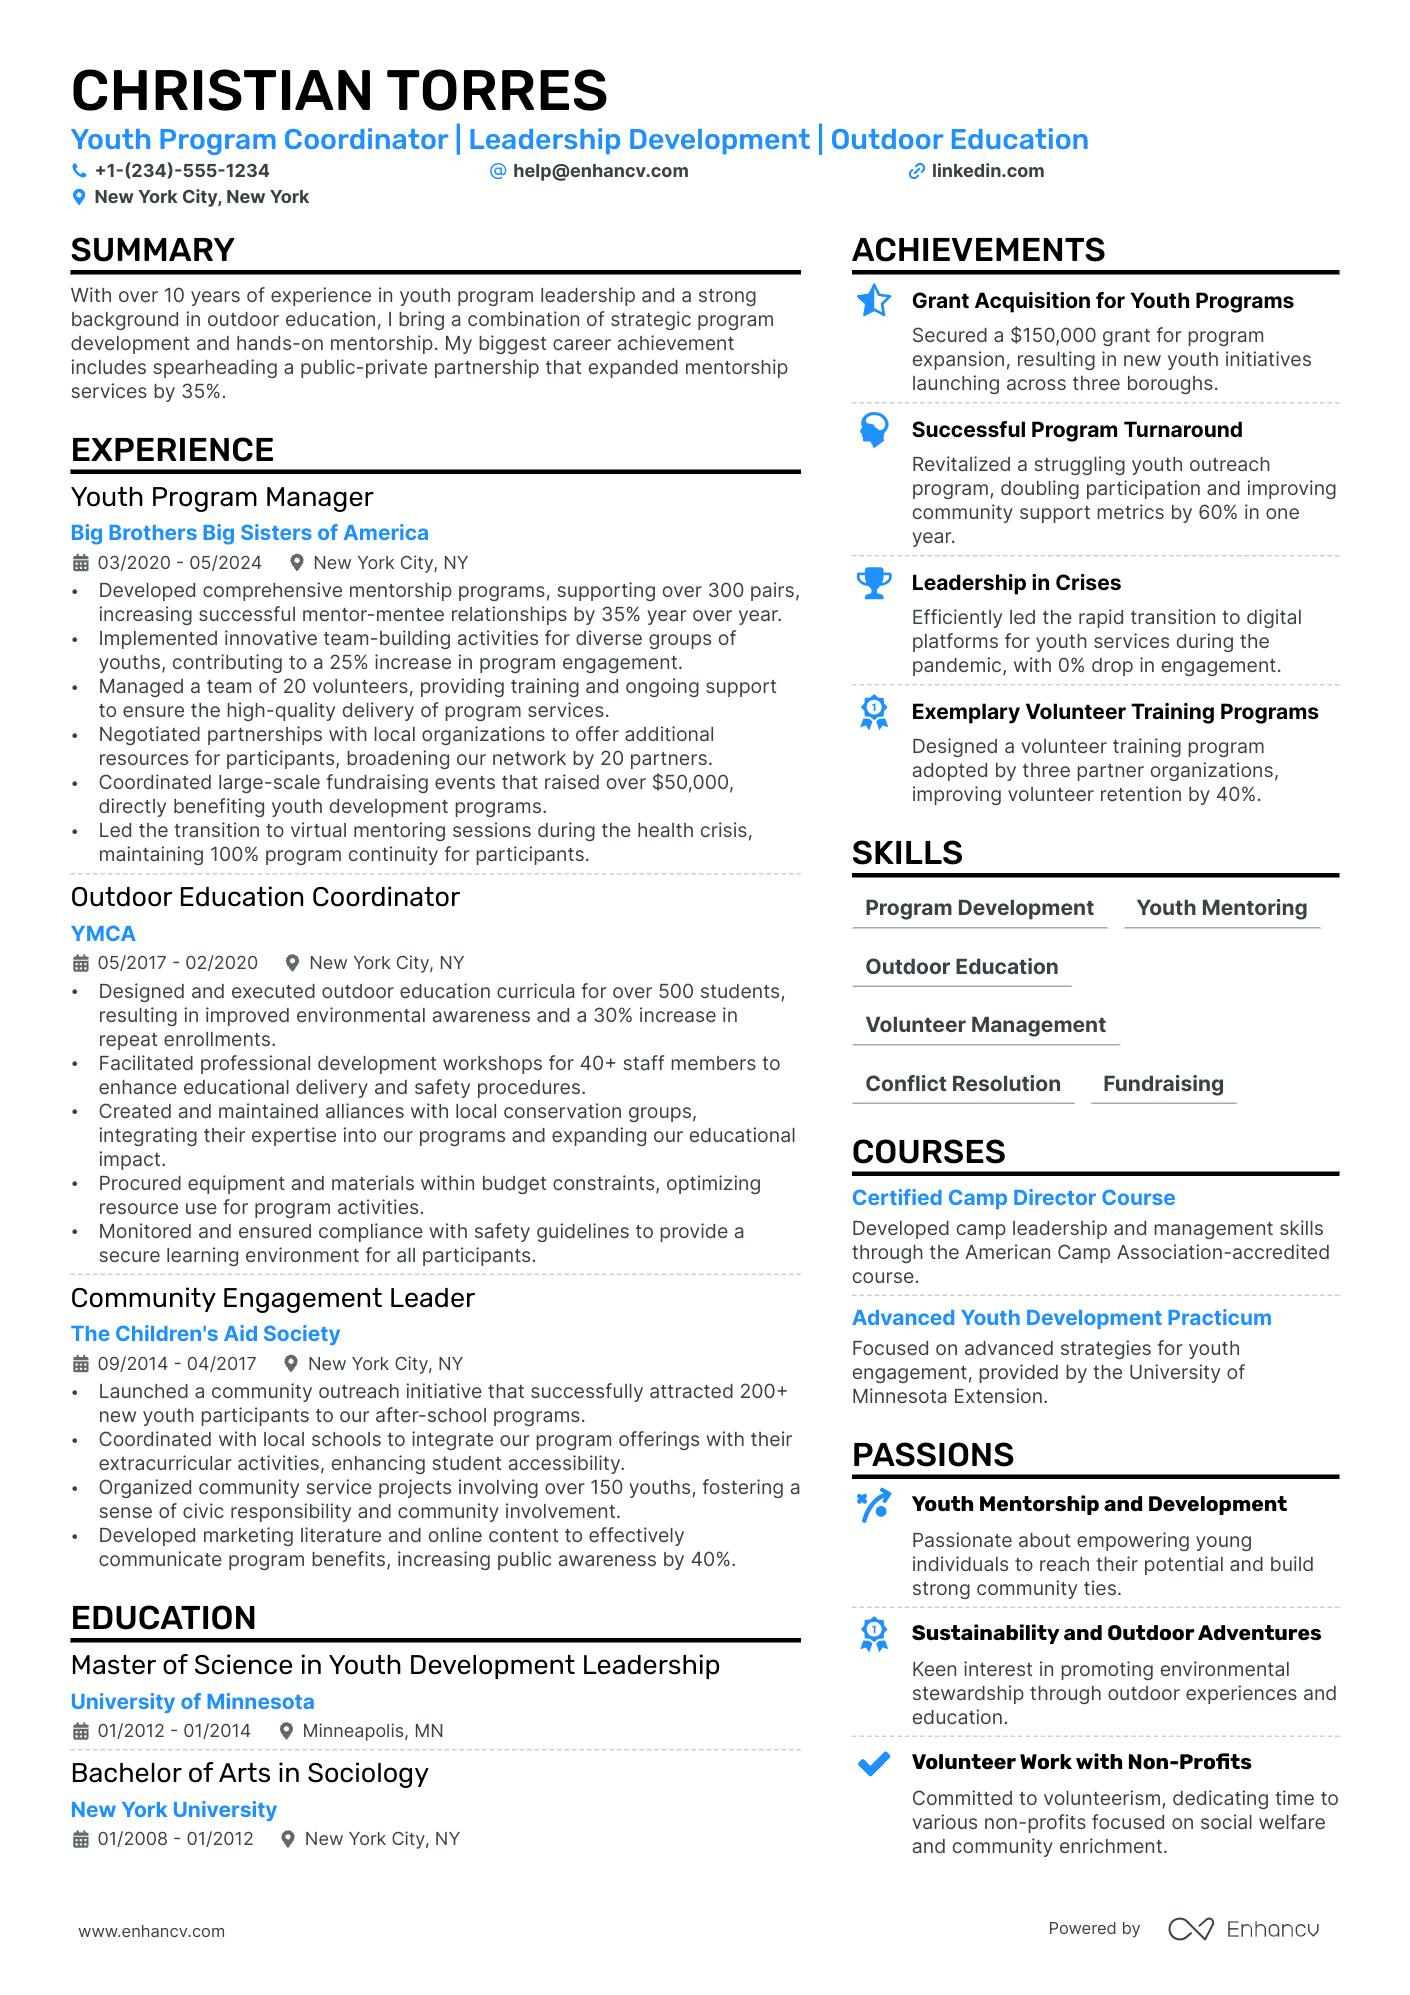 resume objective examples for director